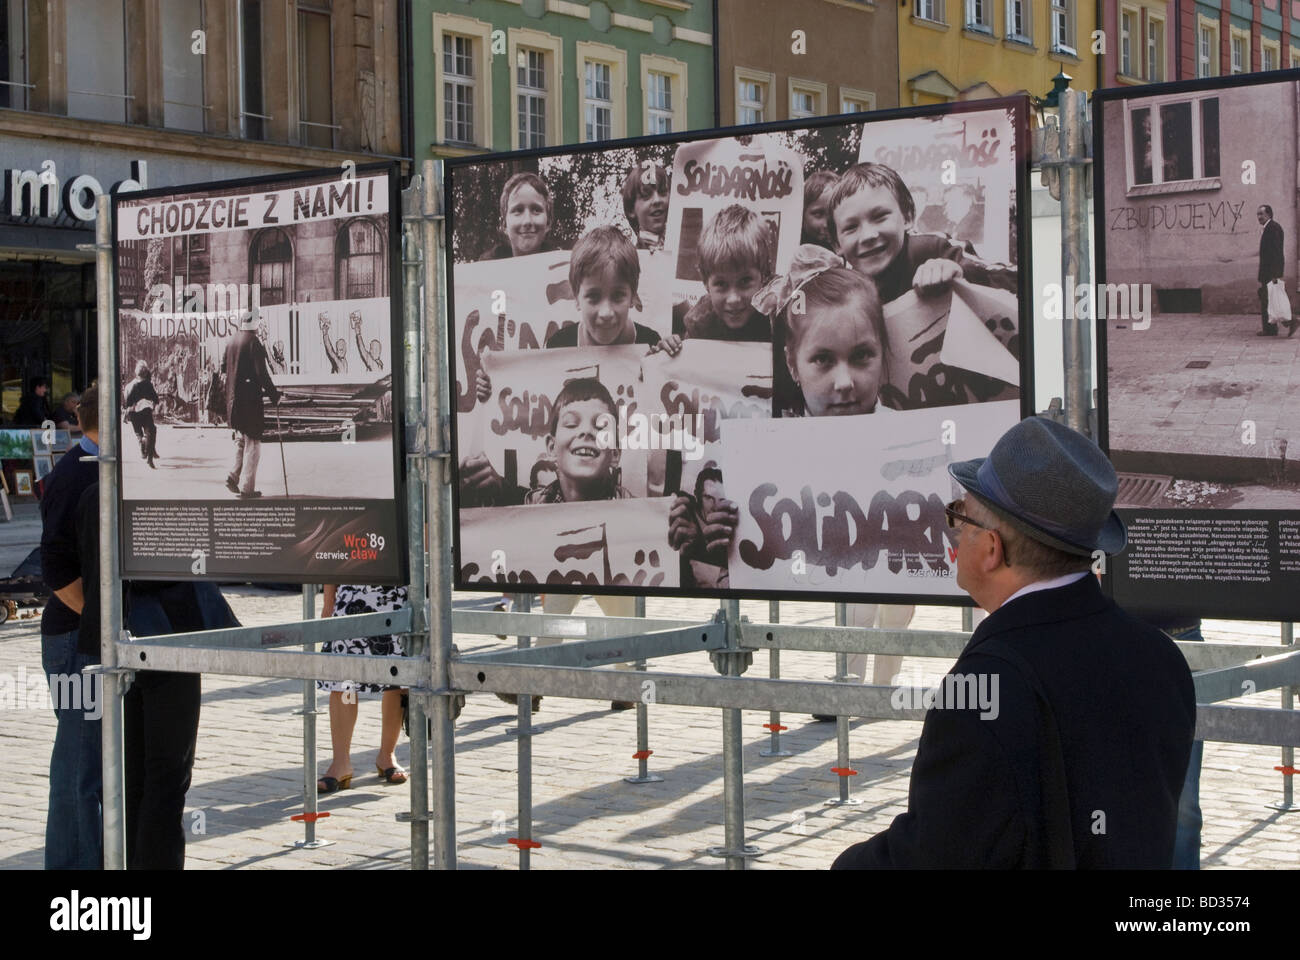 COME WITH US and SOLIDARITY signs in historic photos Wrocław June 1989 communism collapse, displayed June 2009 in Wrocław Poland Stock Photo